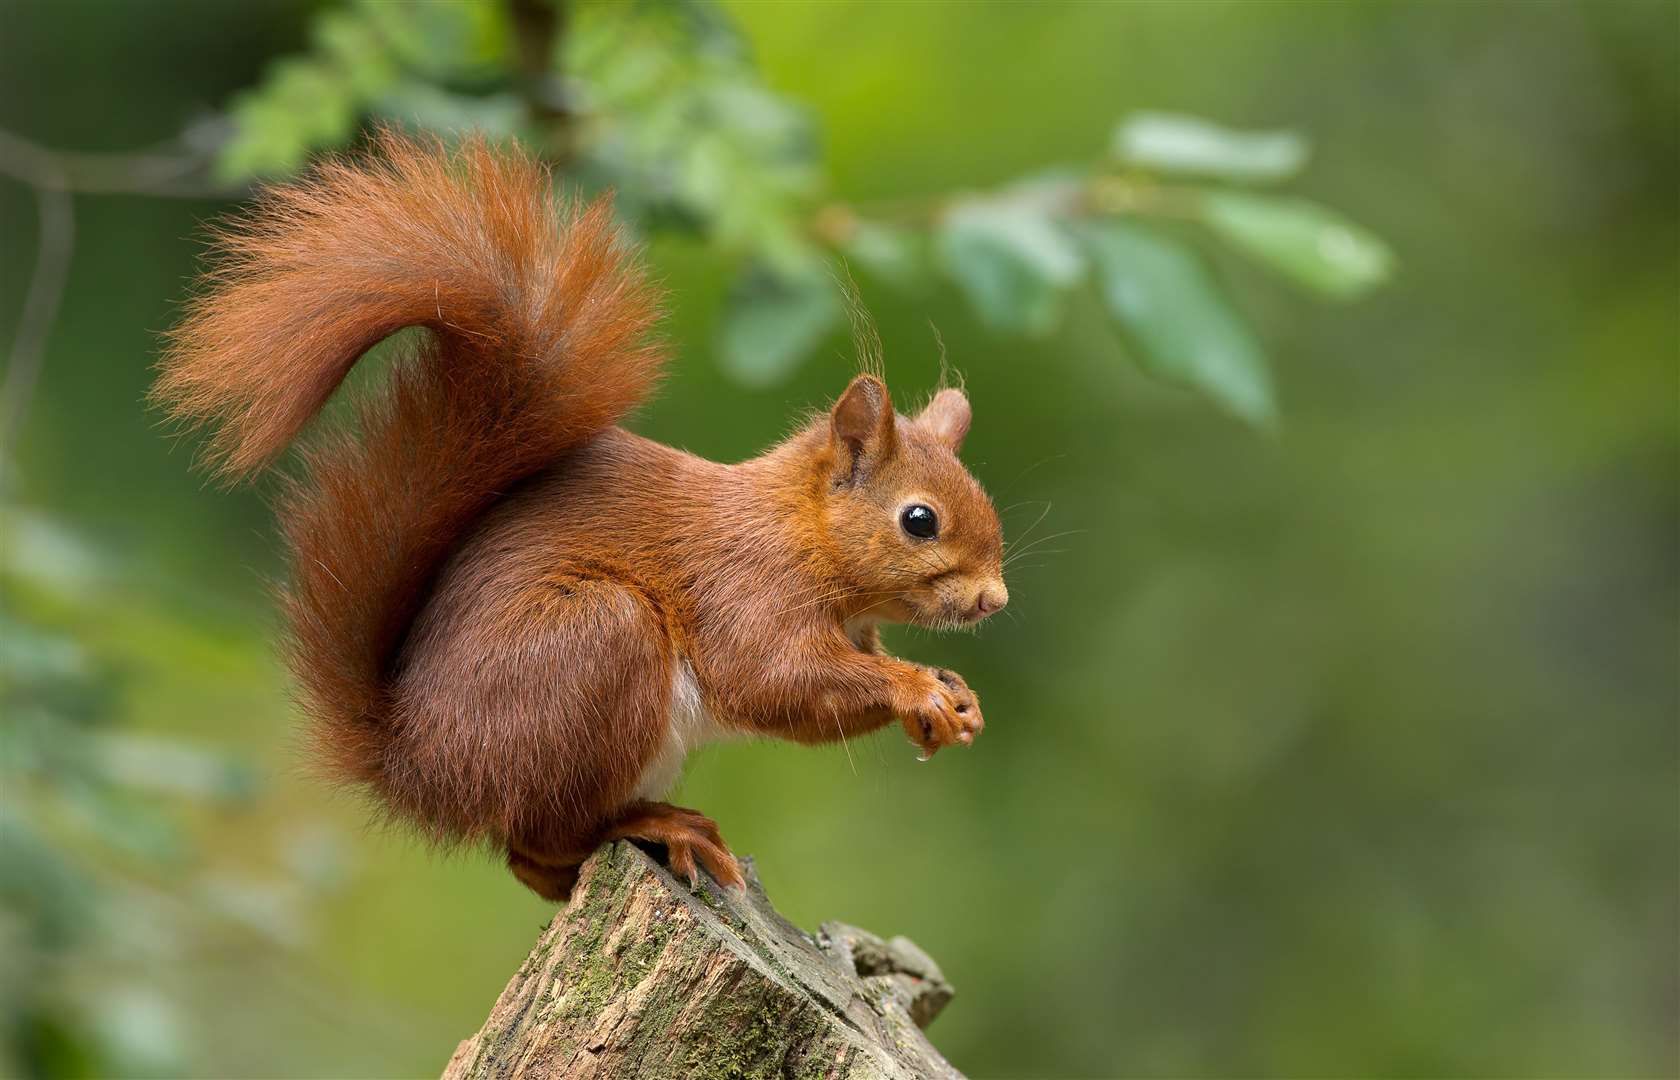 Red squirrels are thriving in the Alladale area.